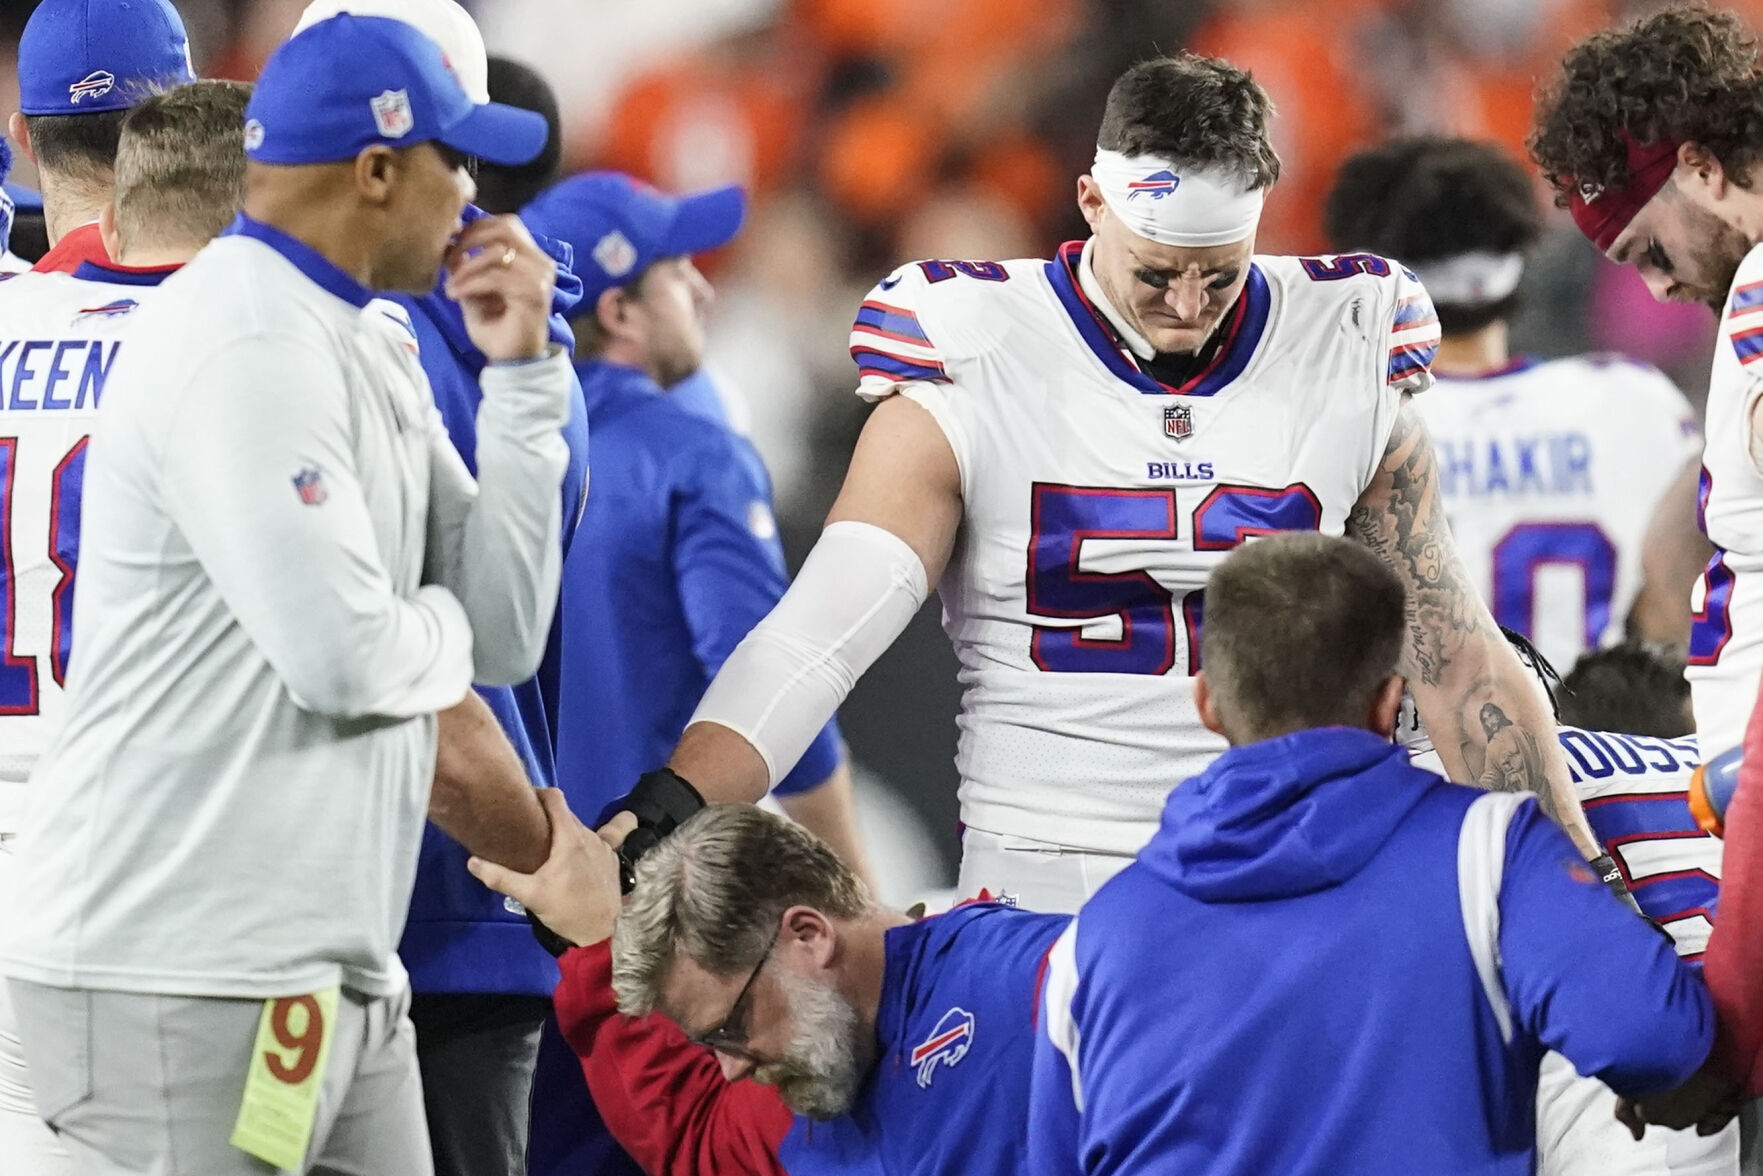 The Bengals Trounce the Bills in an Awkward Playoff Rematch - WSJ